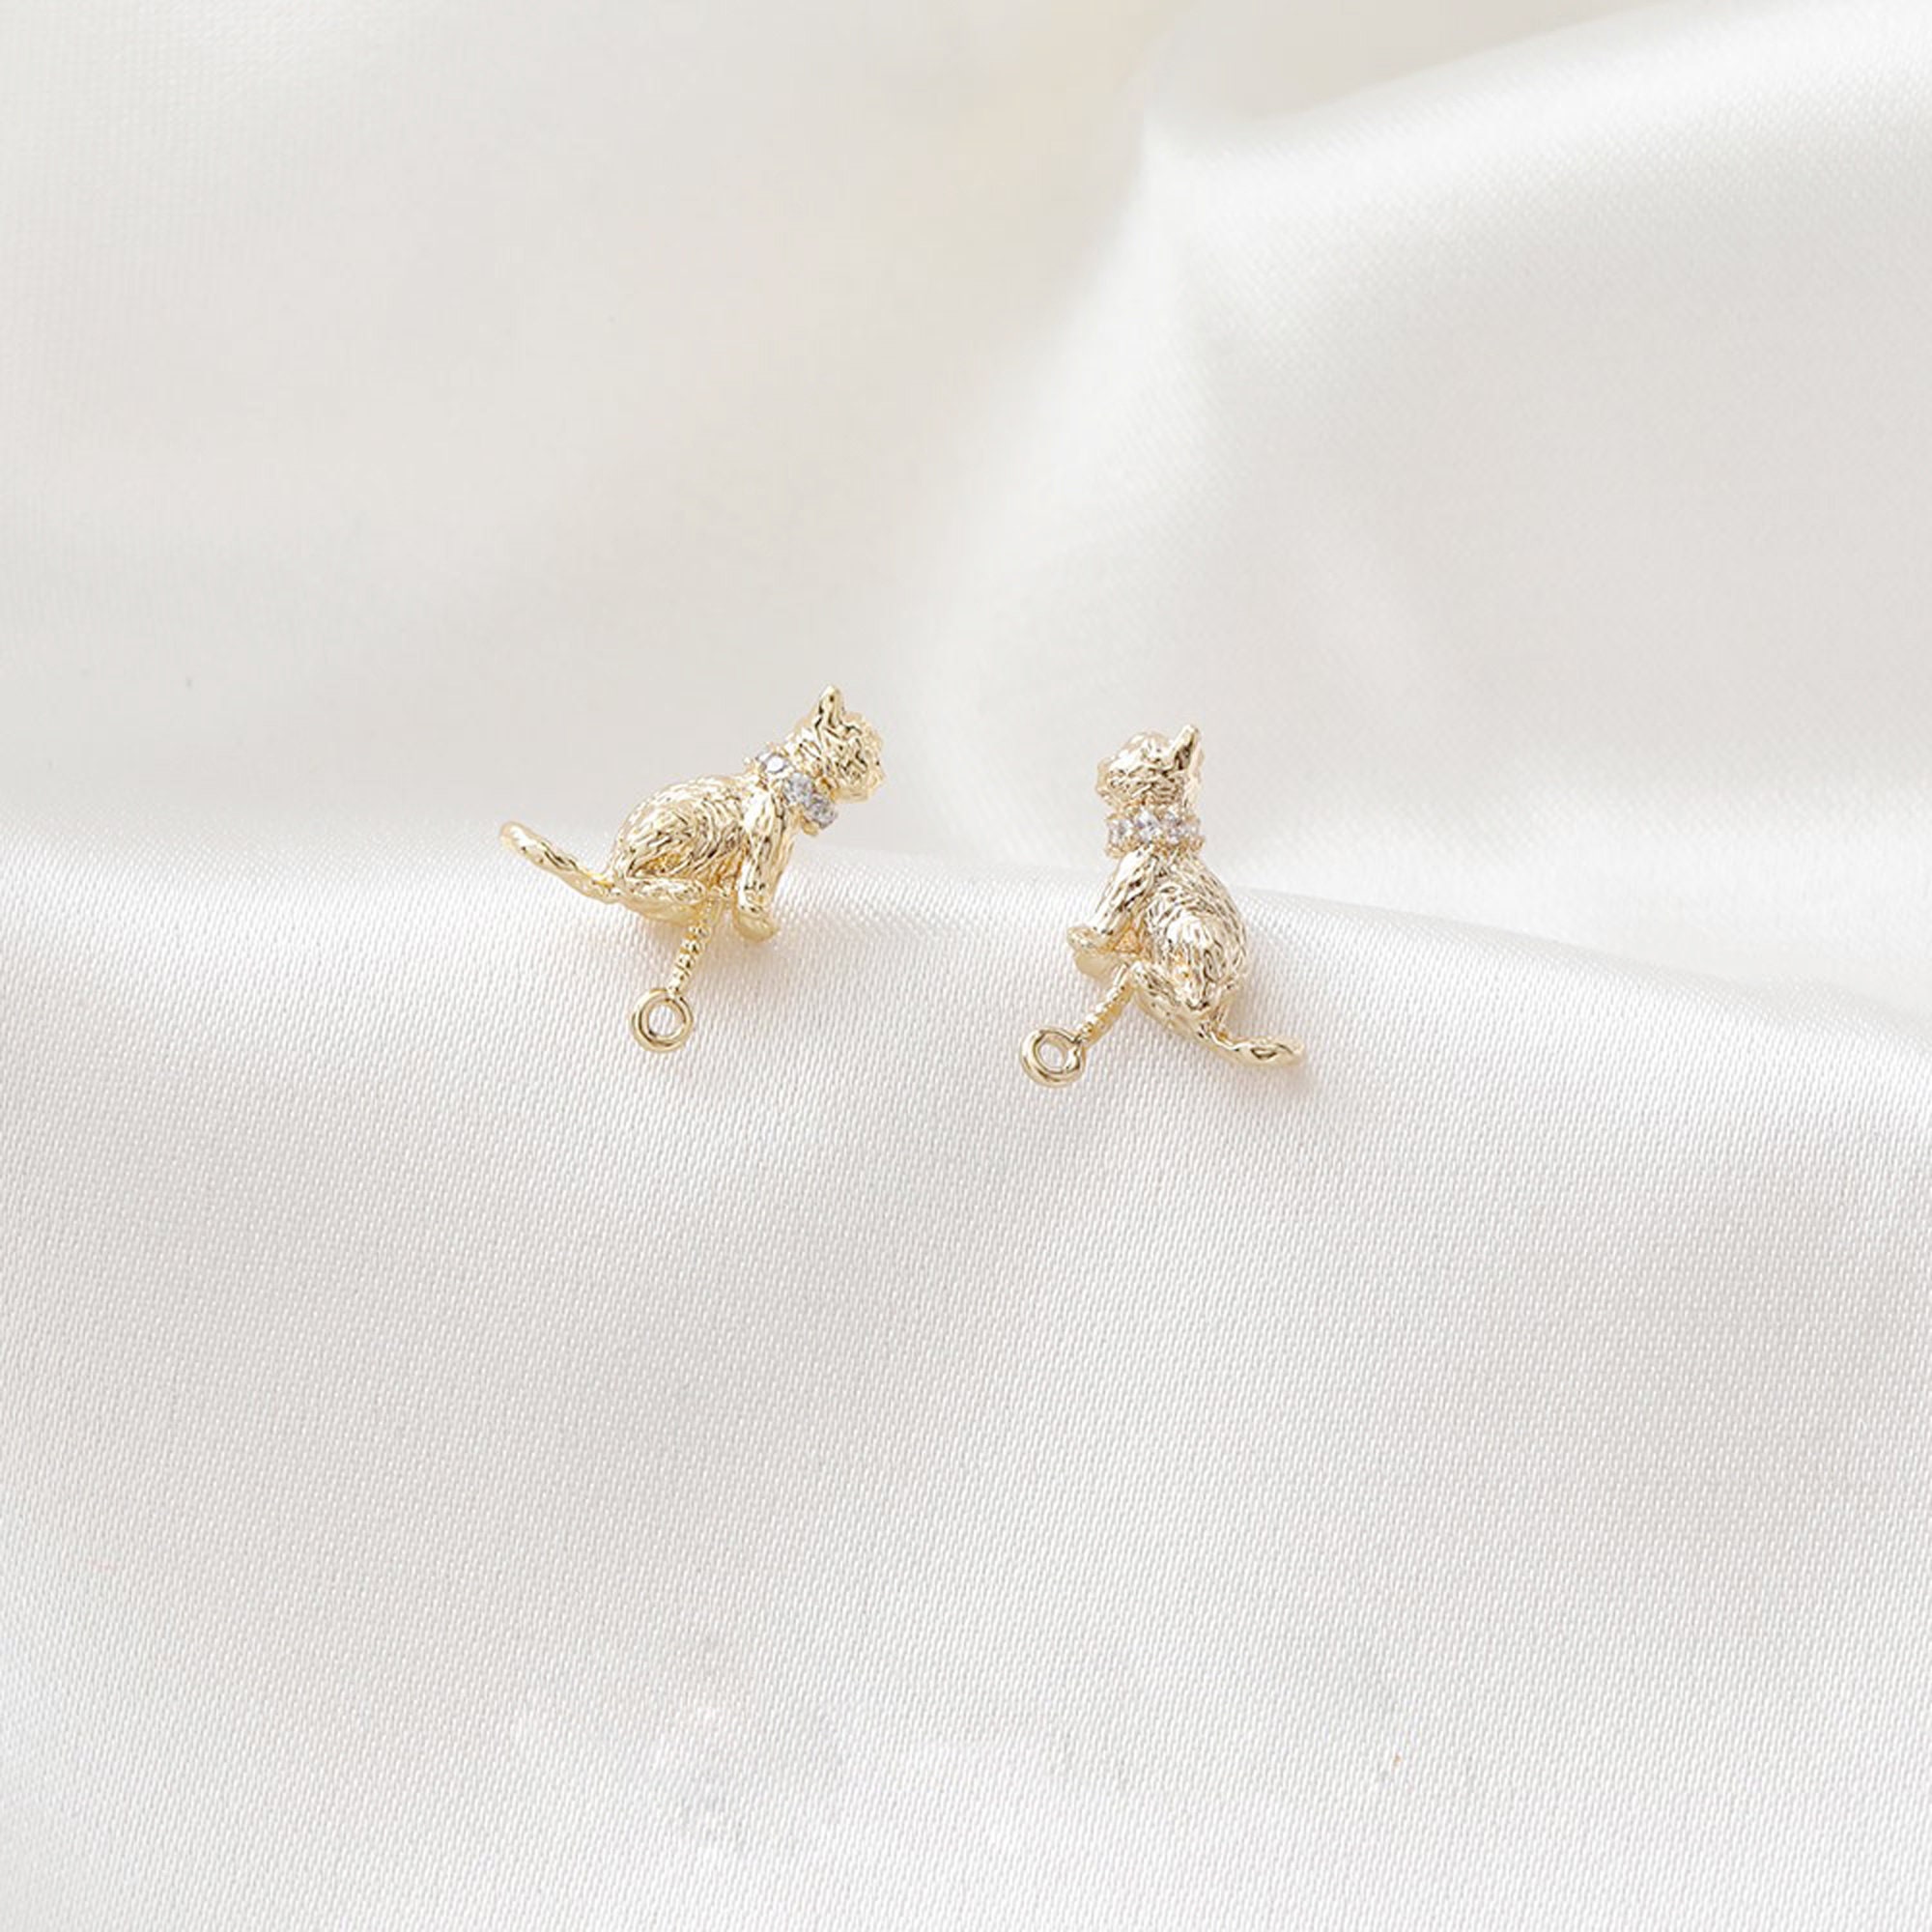 6pcs Real 18K Gold Plated Cat Earrings CZ PAVE Cat Post - Etsy